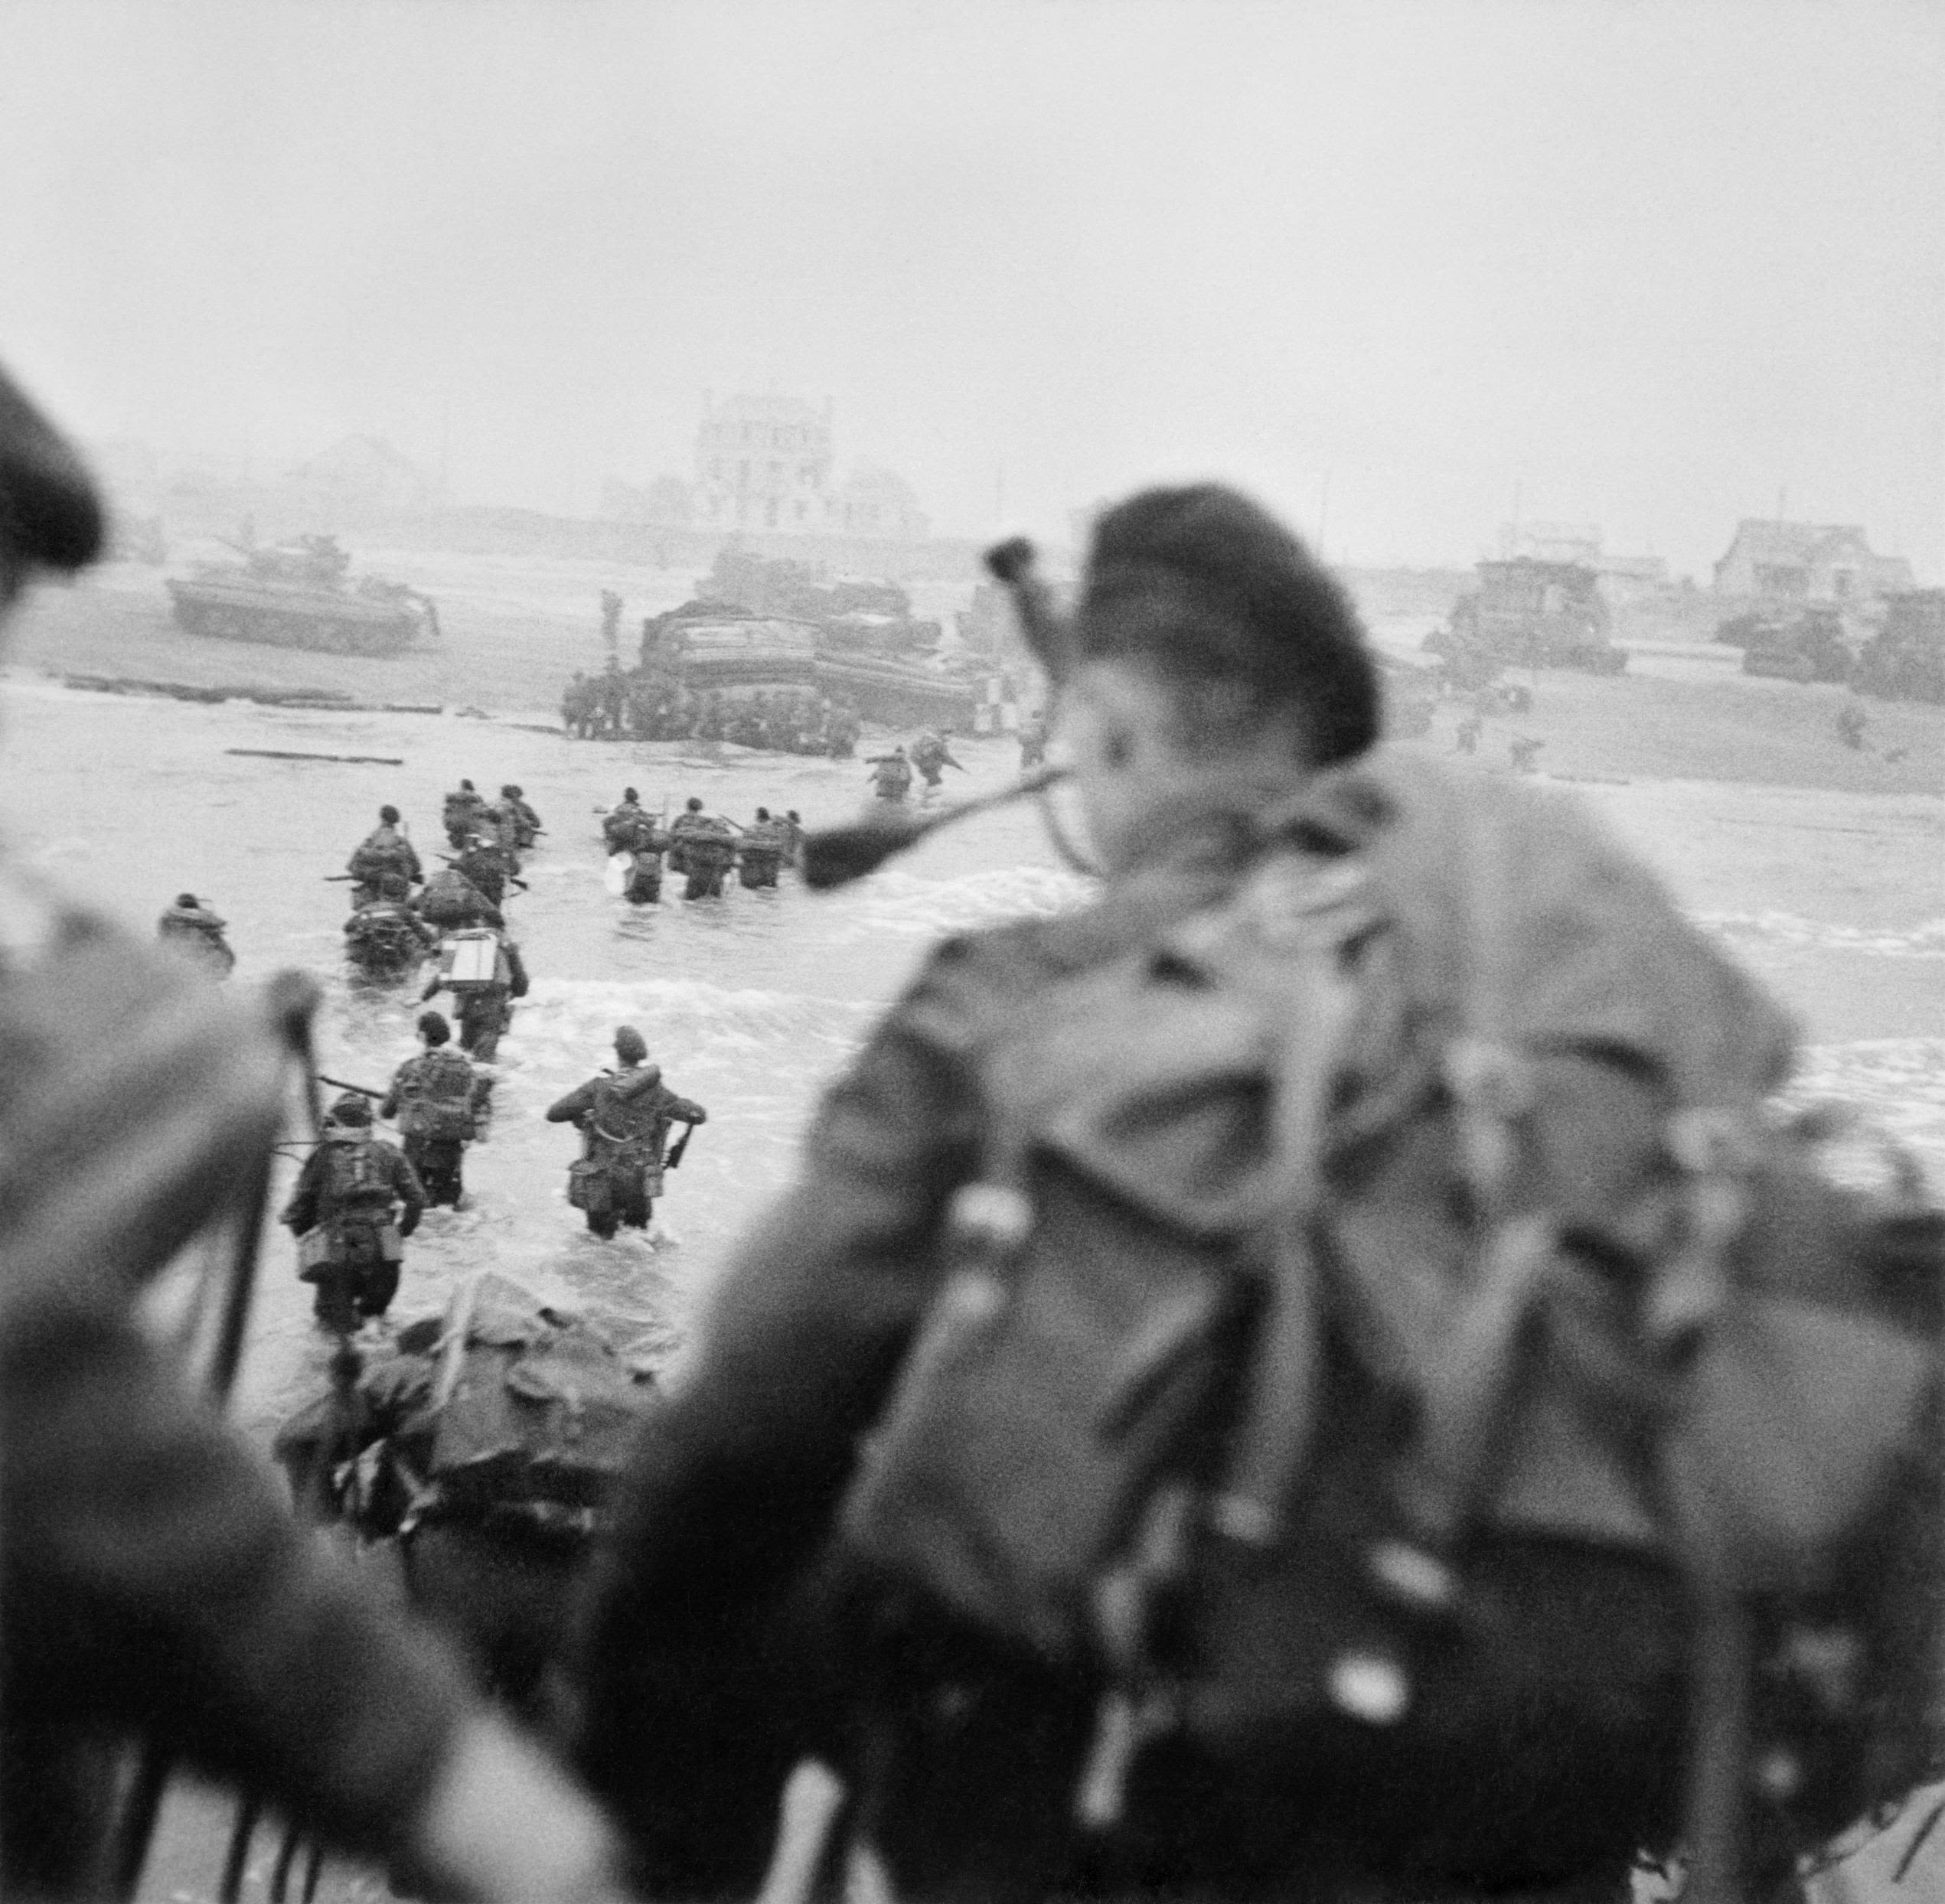 Remembering D-Day: Key facts, figures about epochal World War II invasion